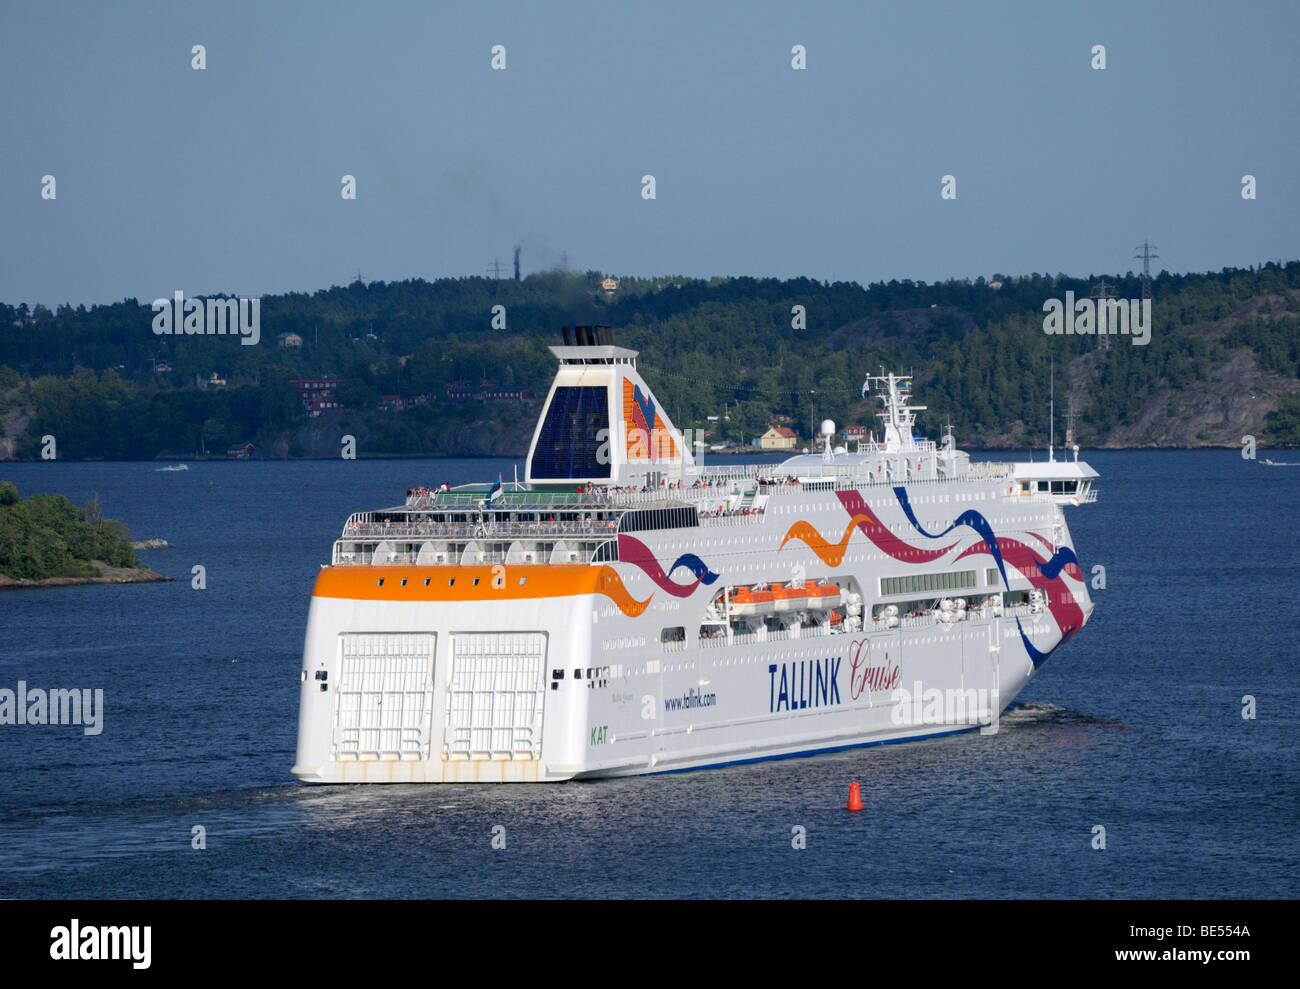 Tallink cruise ship in the archipelago, Stockholm, Sweden, Europe Stock Photo